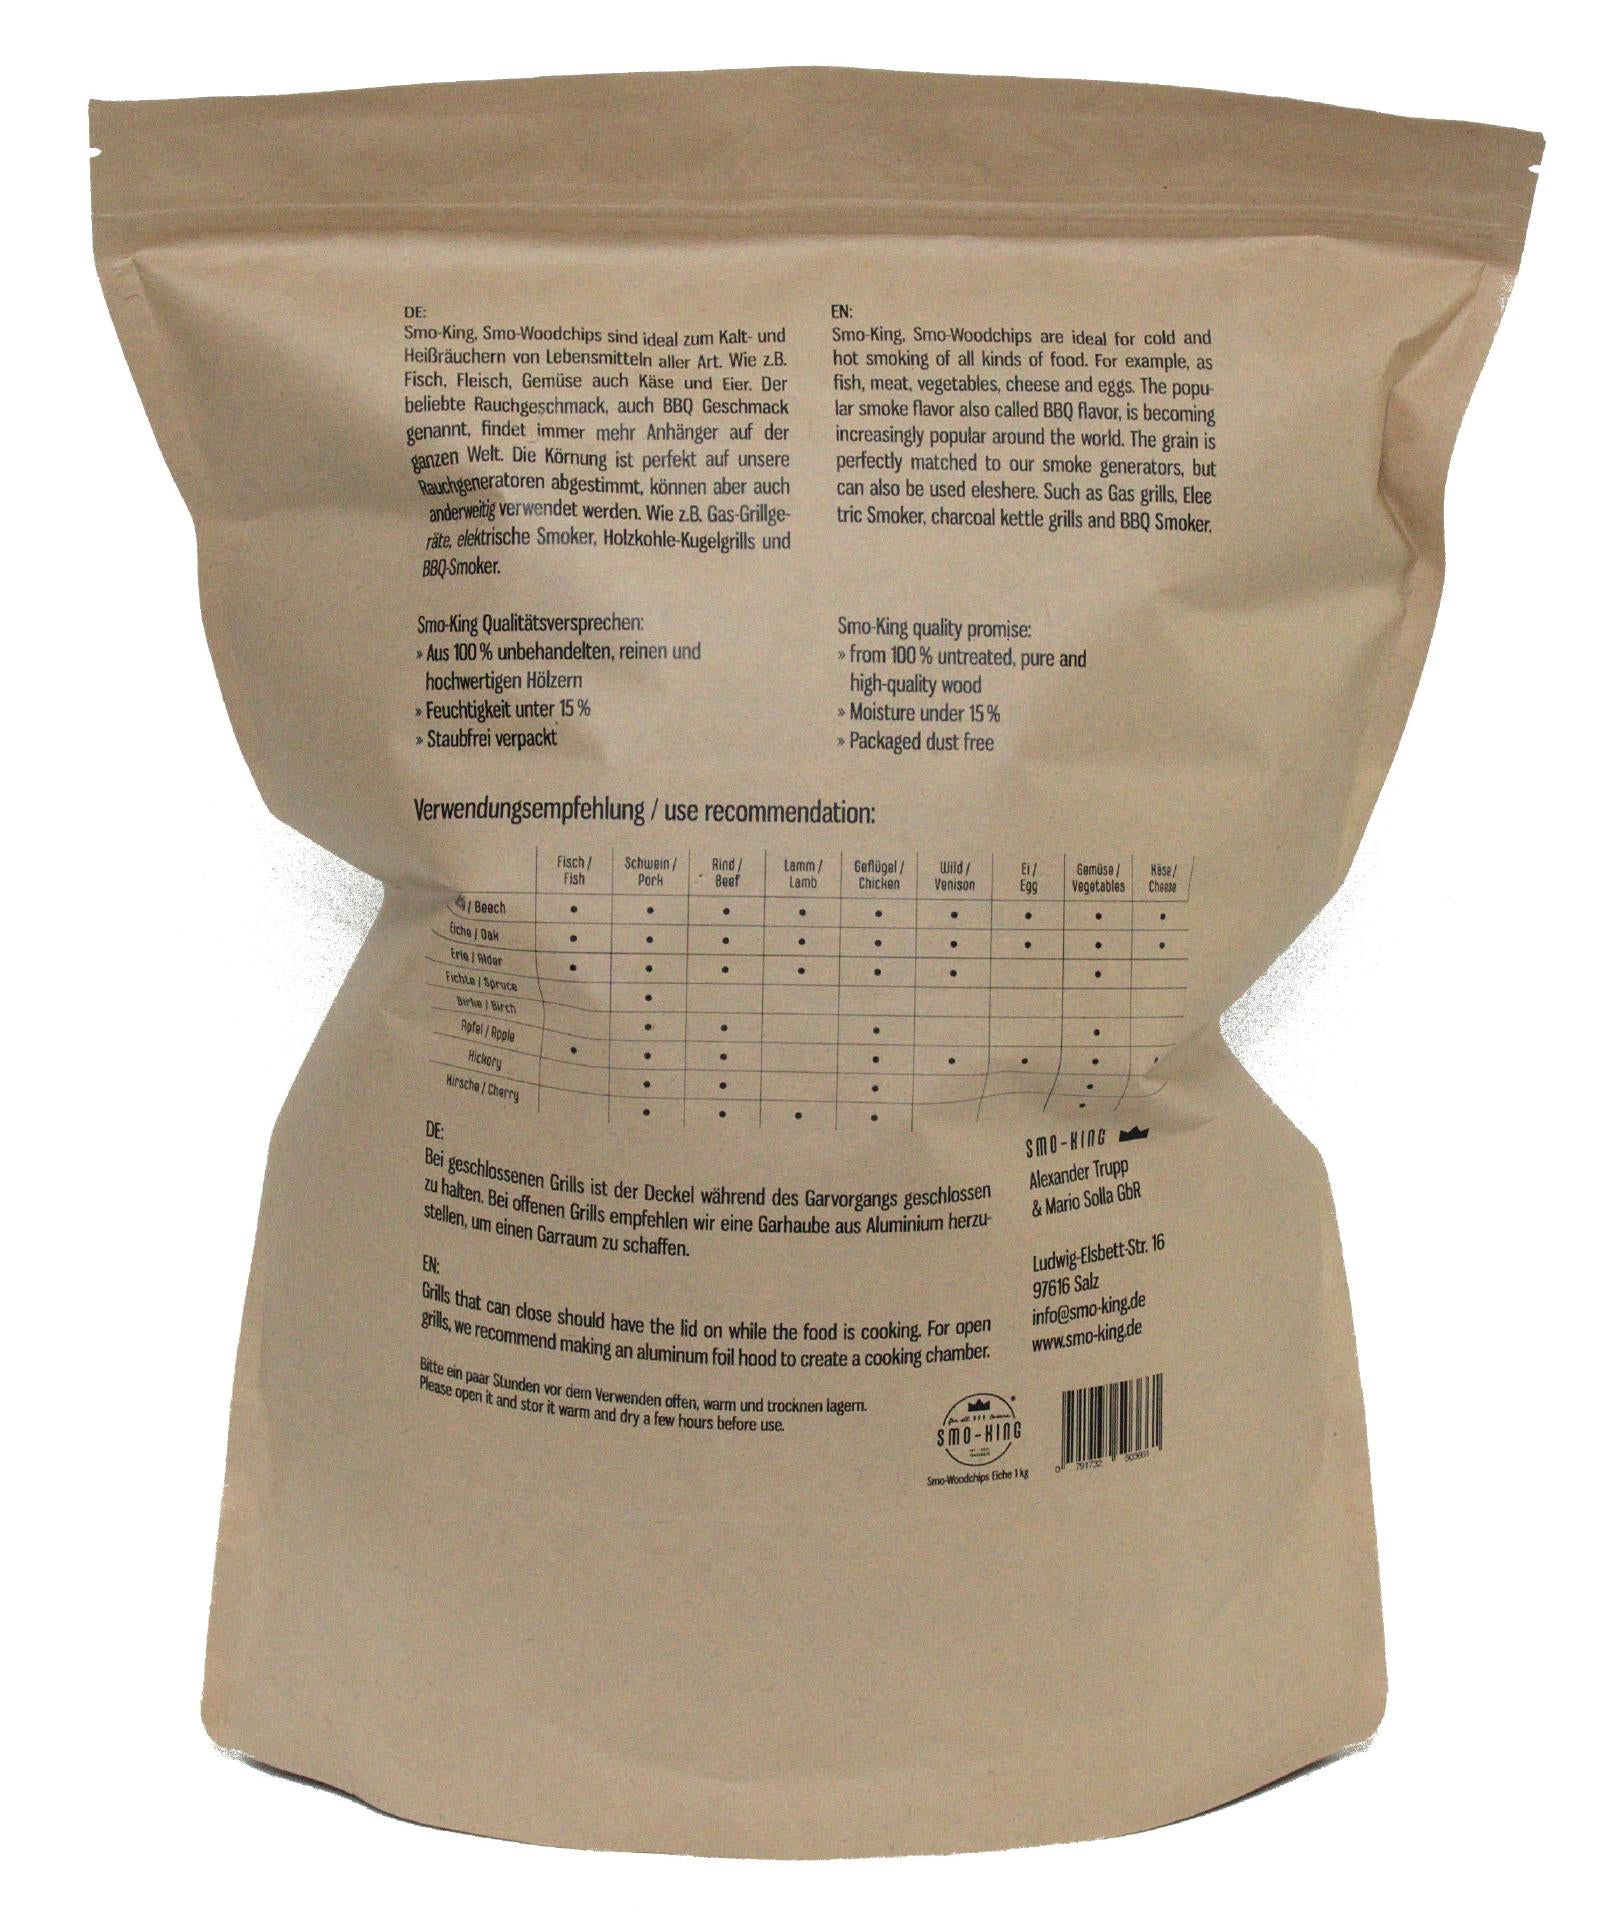 Smo-King Woodchips Eiche 1 kg